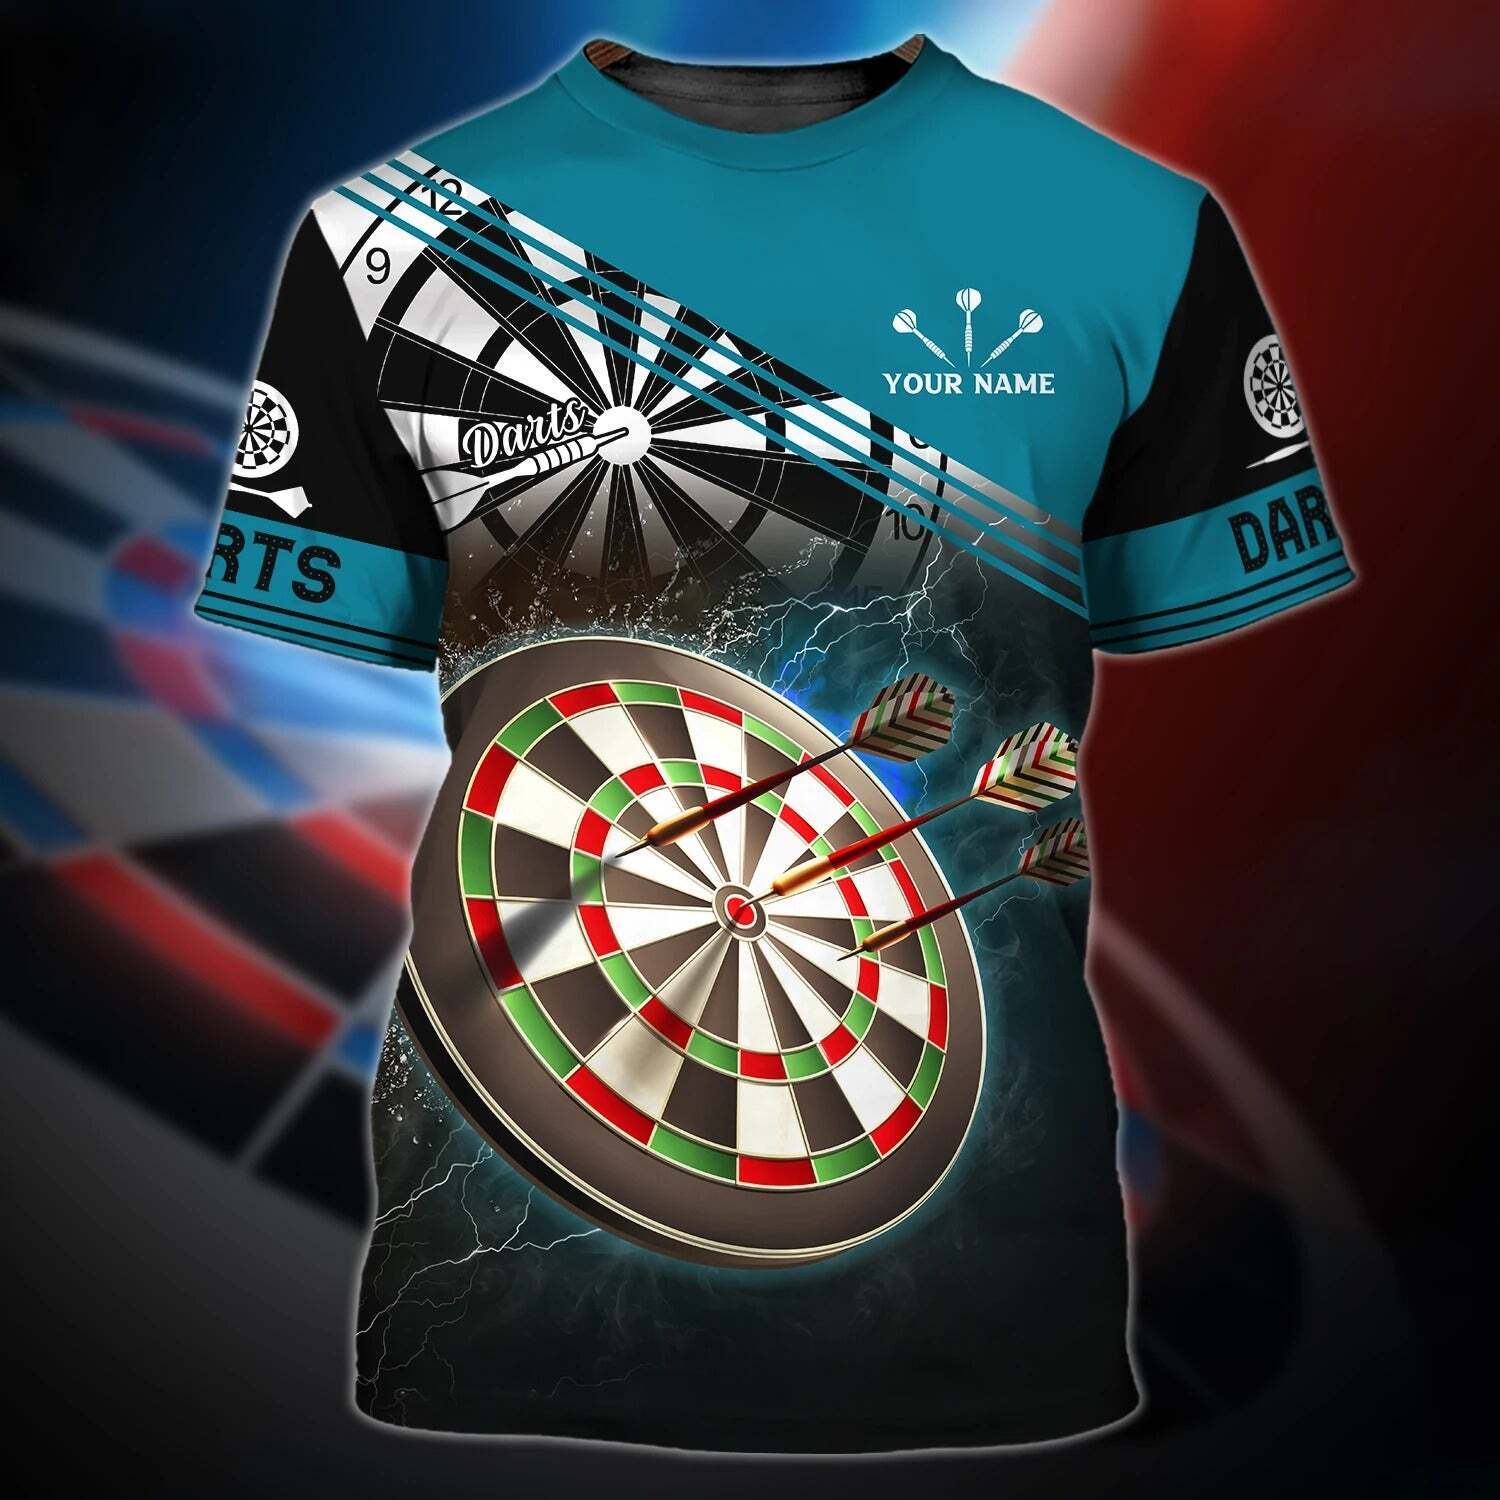 jeans Formålet Kompliment Customized With Name Gifts For Darts Players, Dart Shirt Full Printing, Best  Dar | eBay